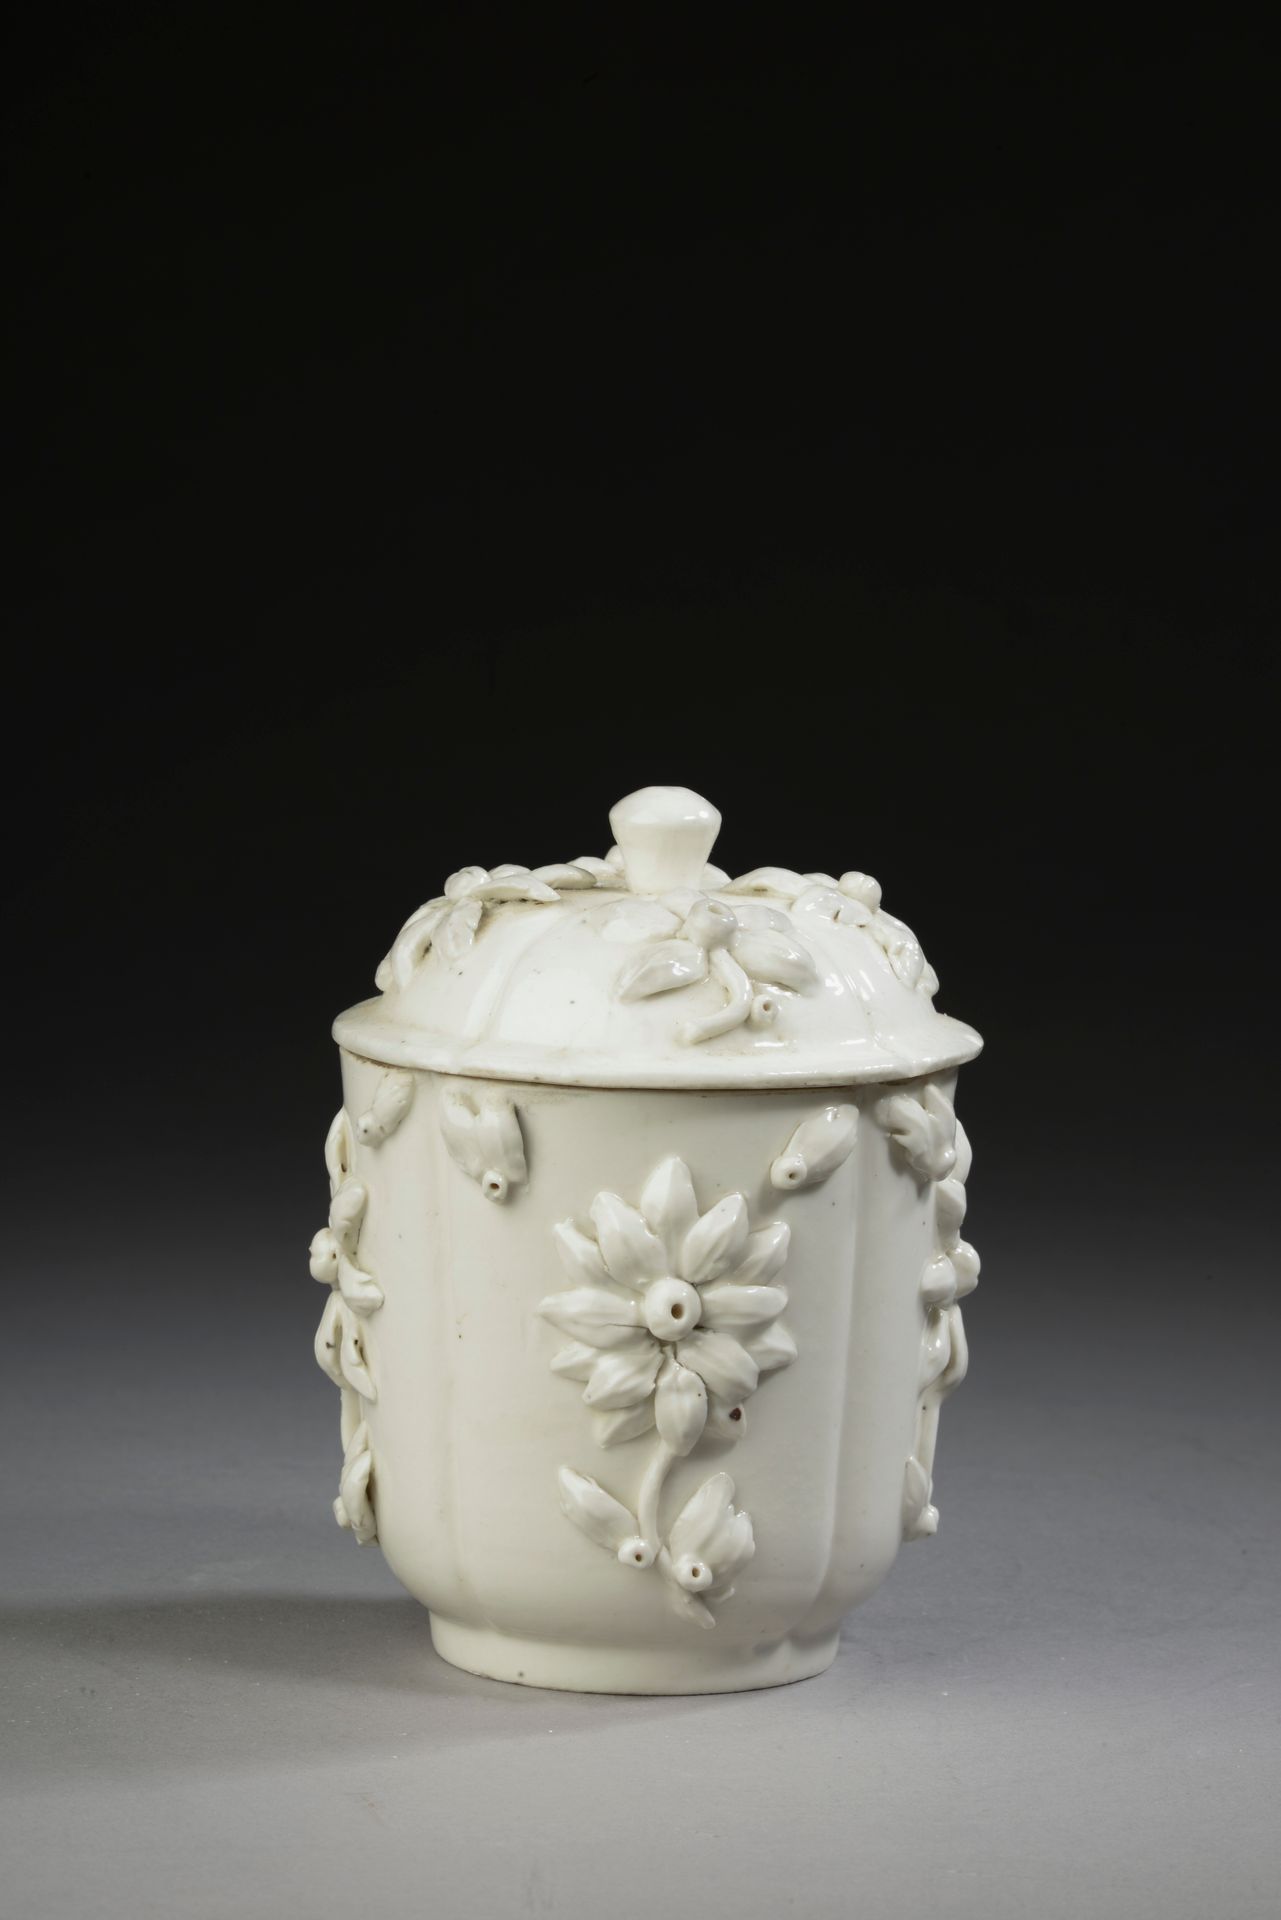 Null SANSON
Covered pot in white enamelled porcelain with applied floral motifs,&hellip;